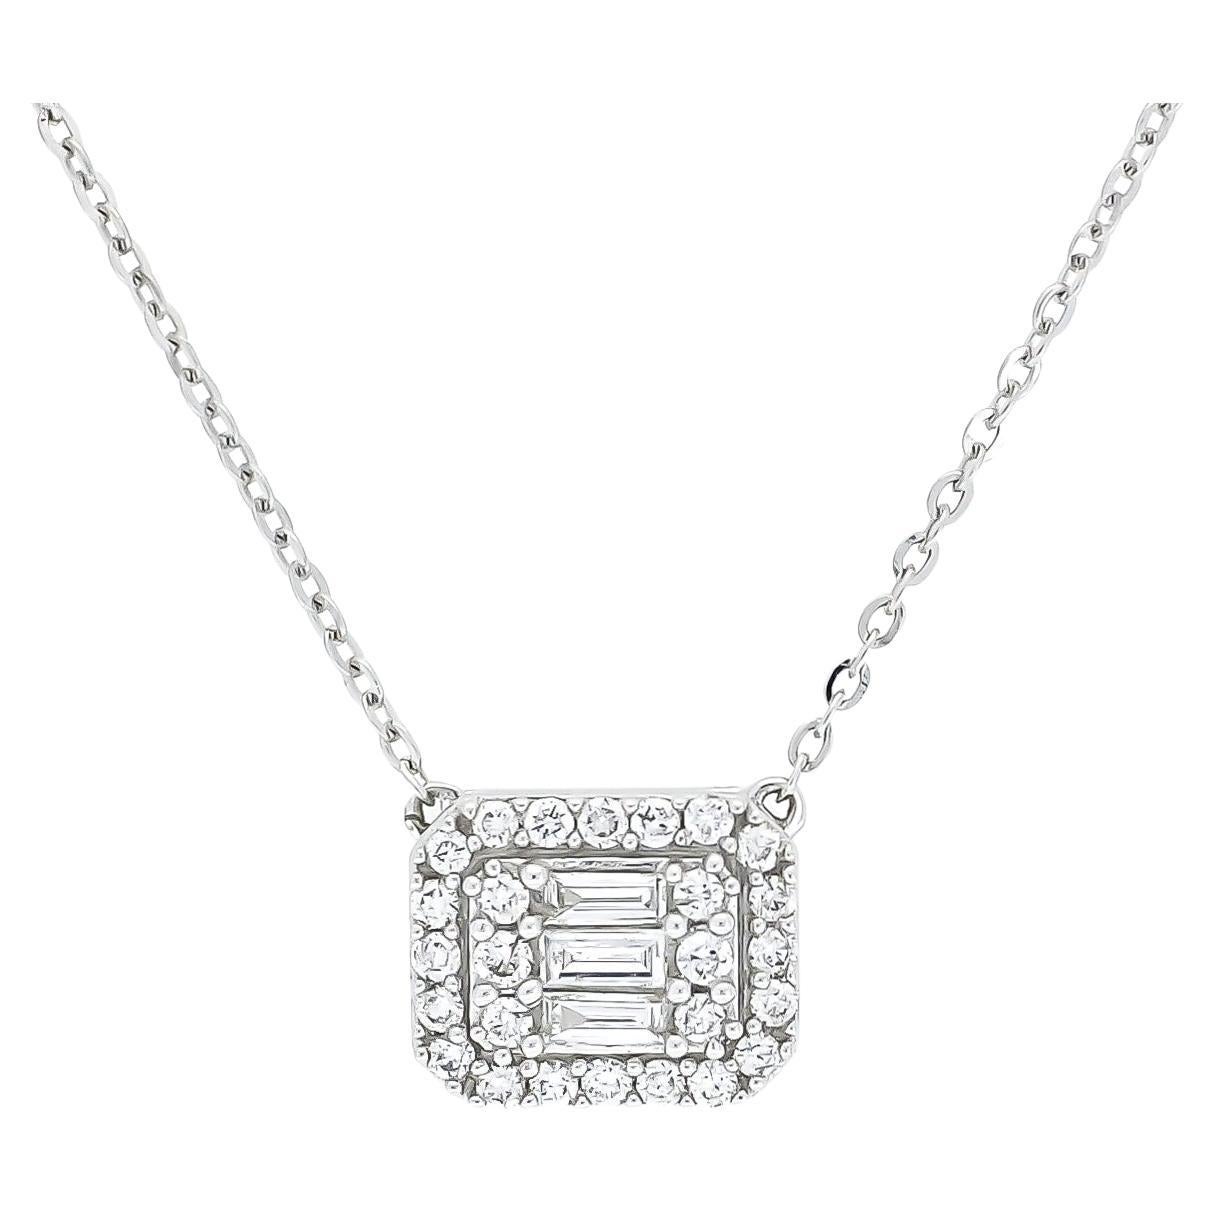 Natural Diamond Pendant 0.25 CT 18KT White Gold Cluster Halo Chain Necklace